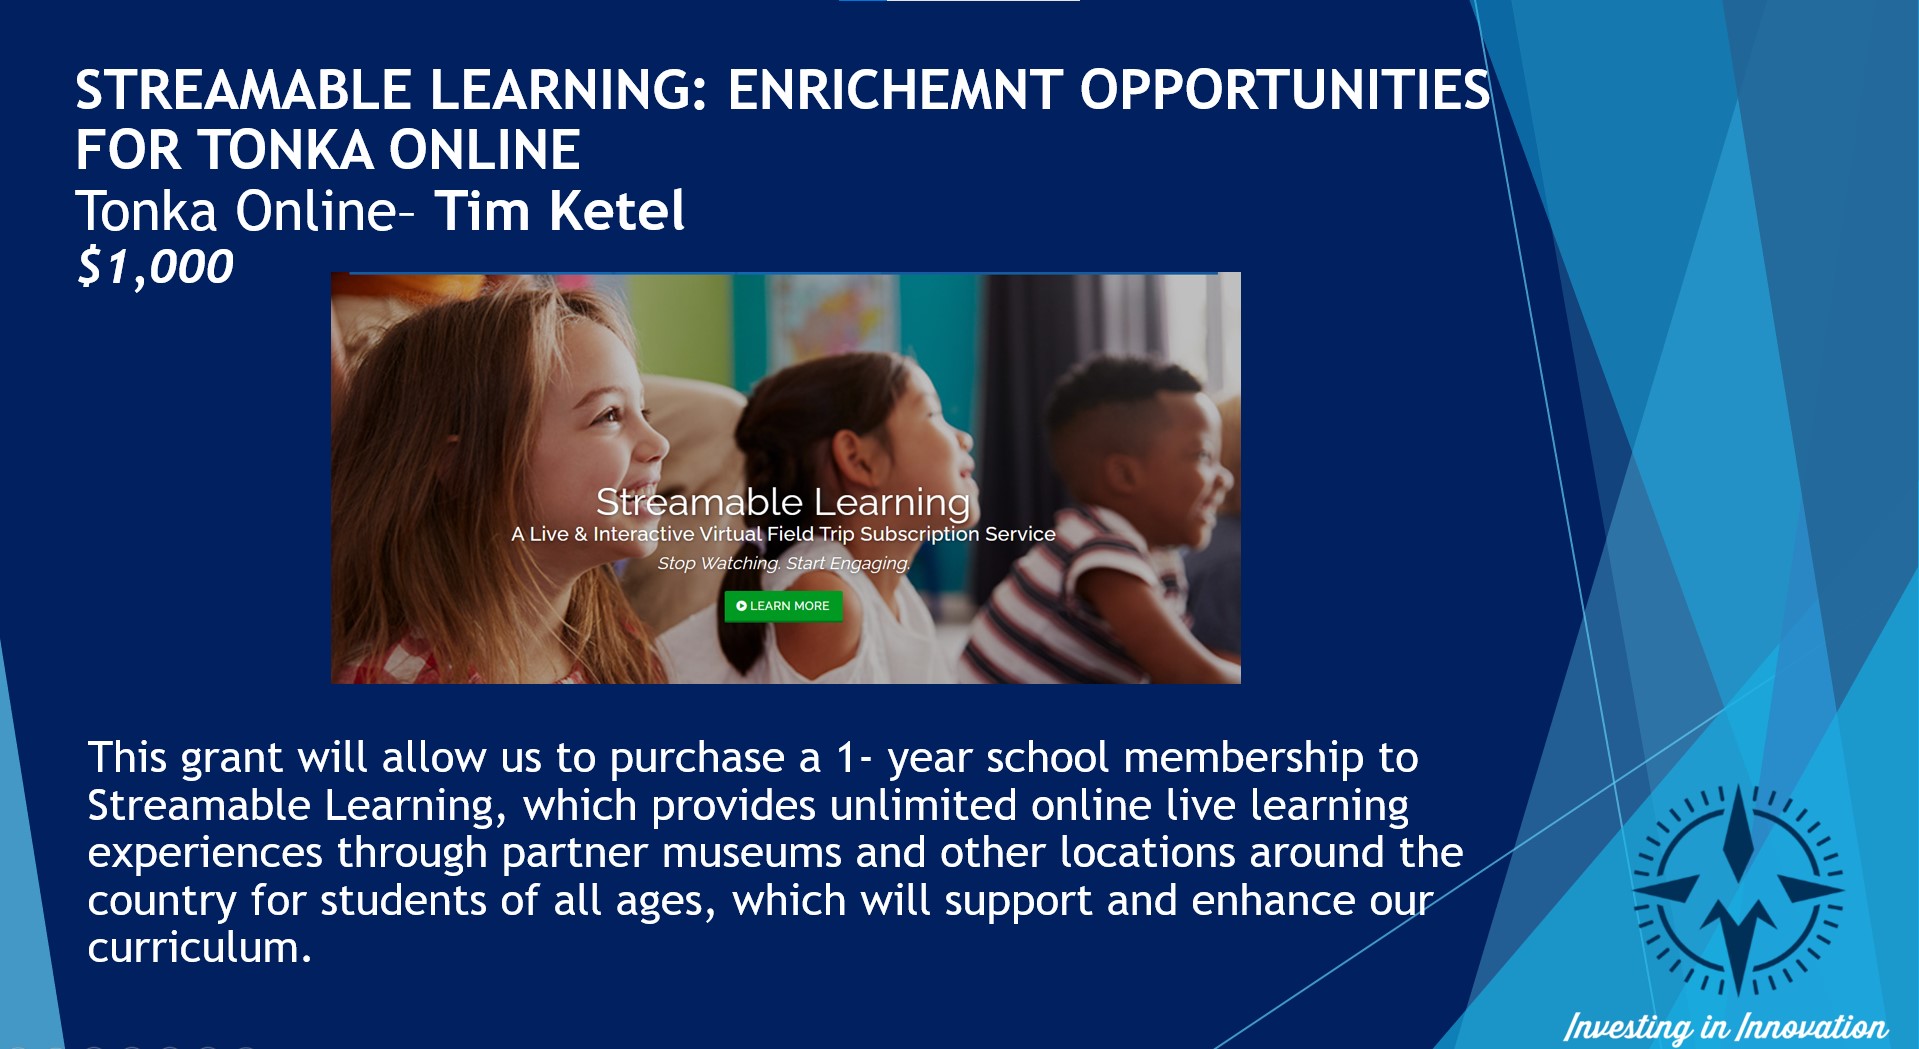 Streamable Learning Enrichment Opportunities